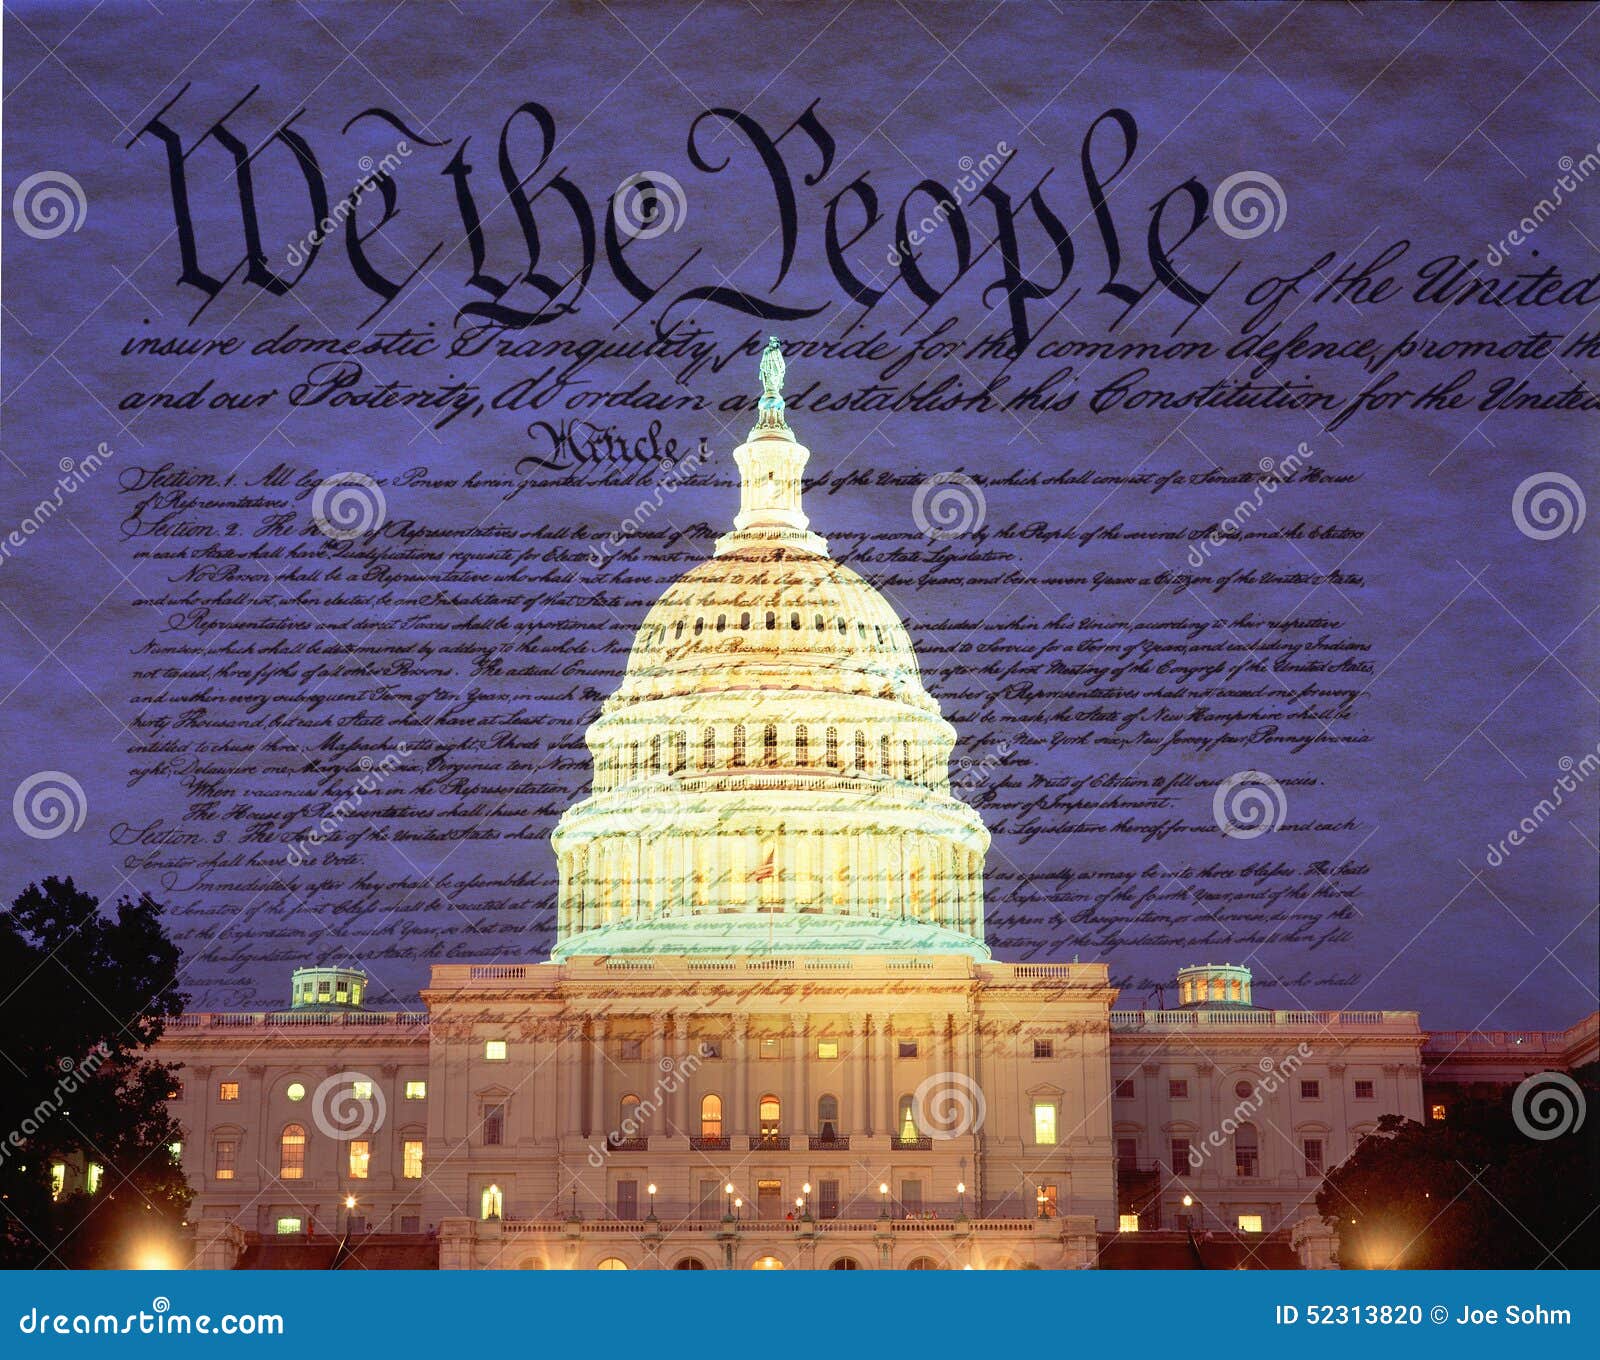 composite image of the u.s. capitol and the u.s. constitution